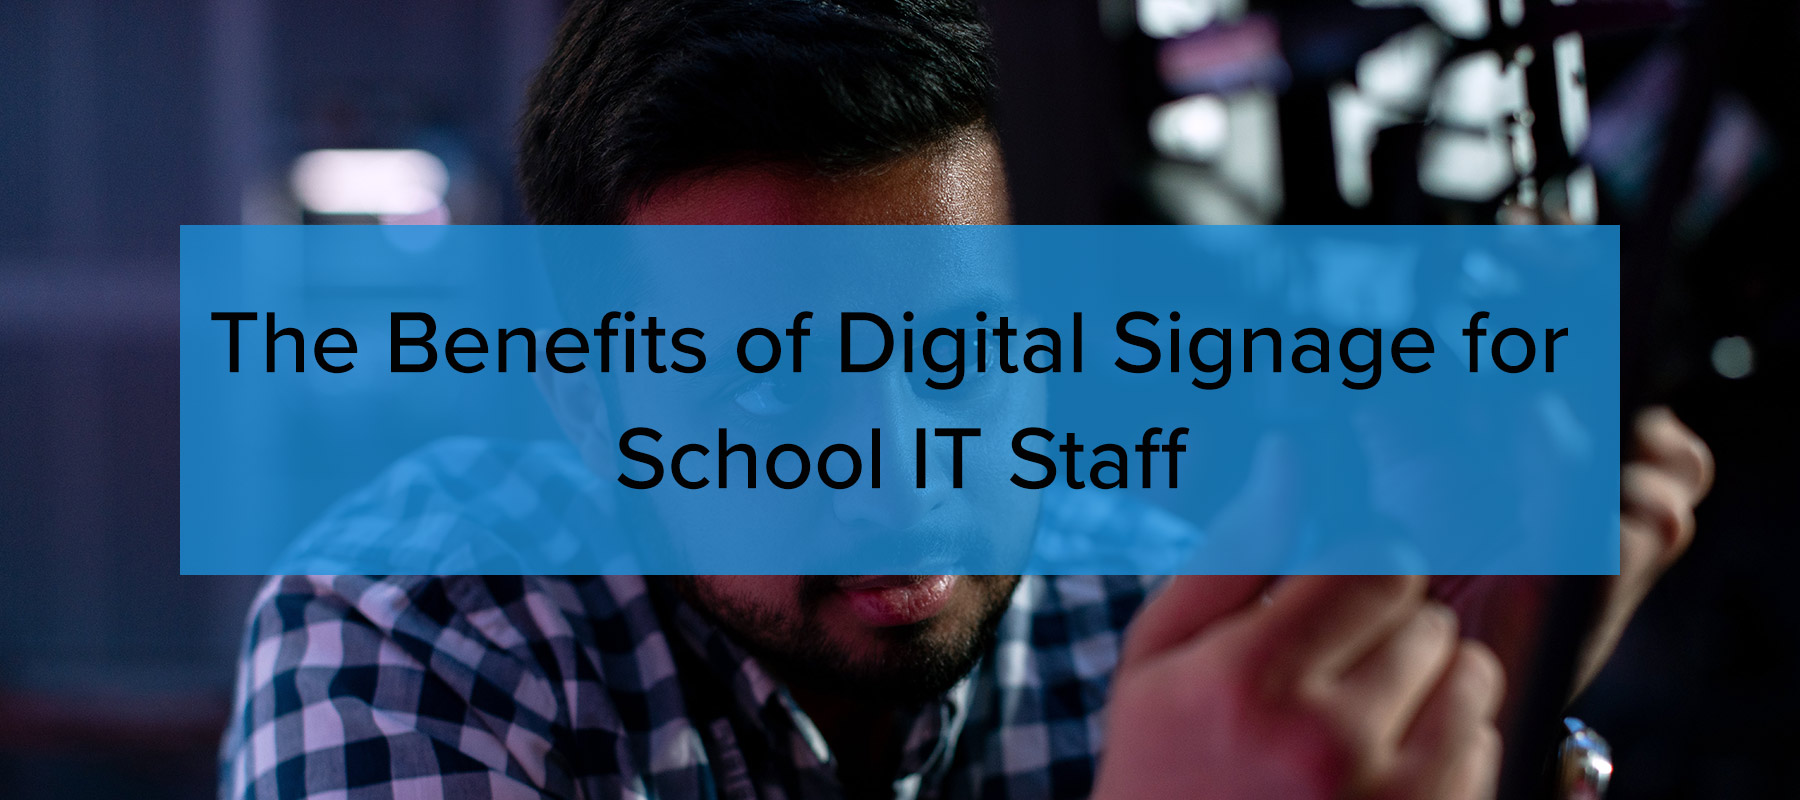 The Benefits of Digital Signage for School IT Staff